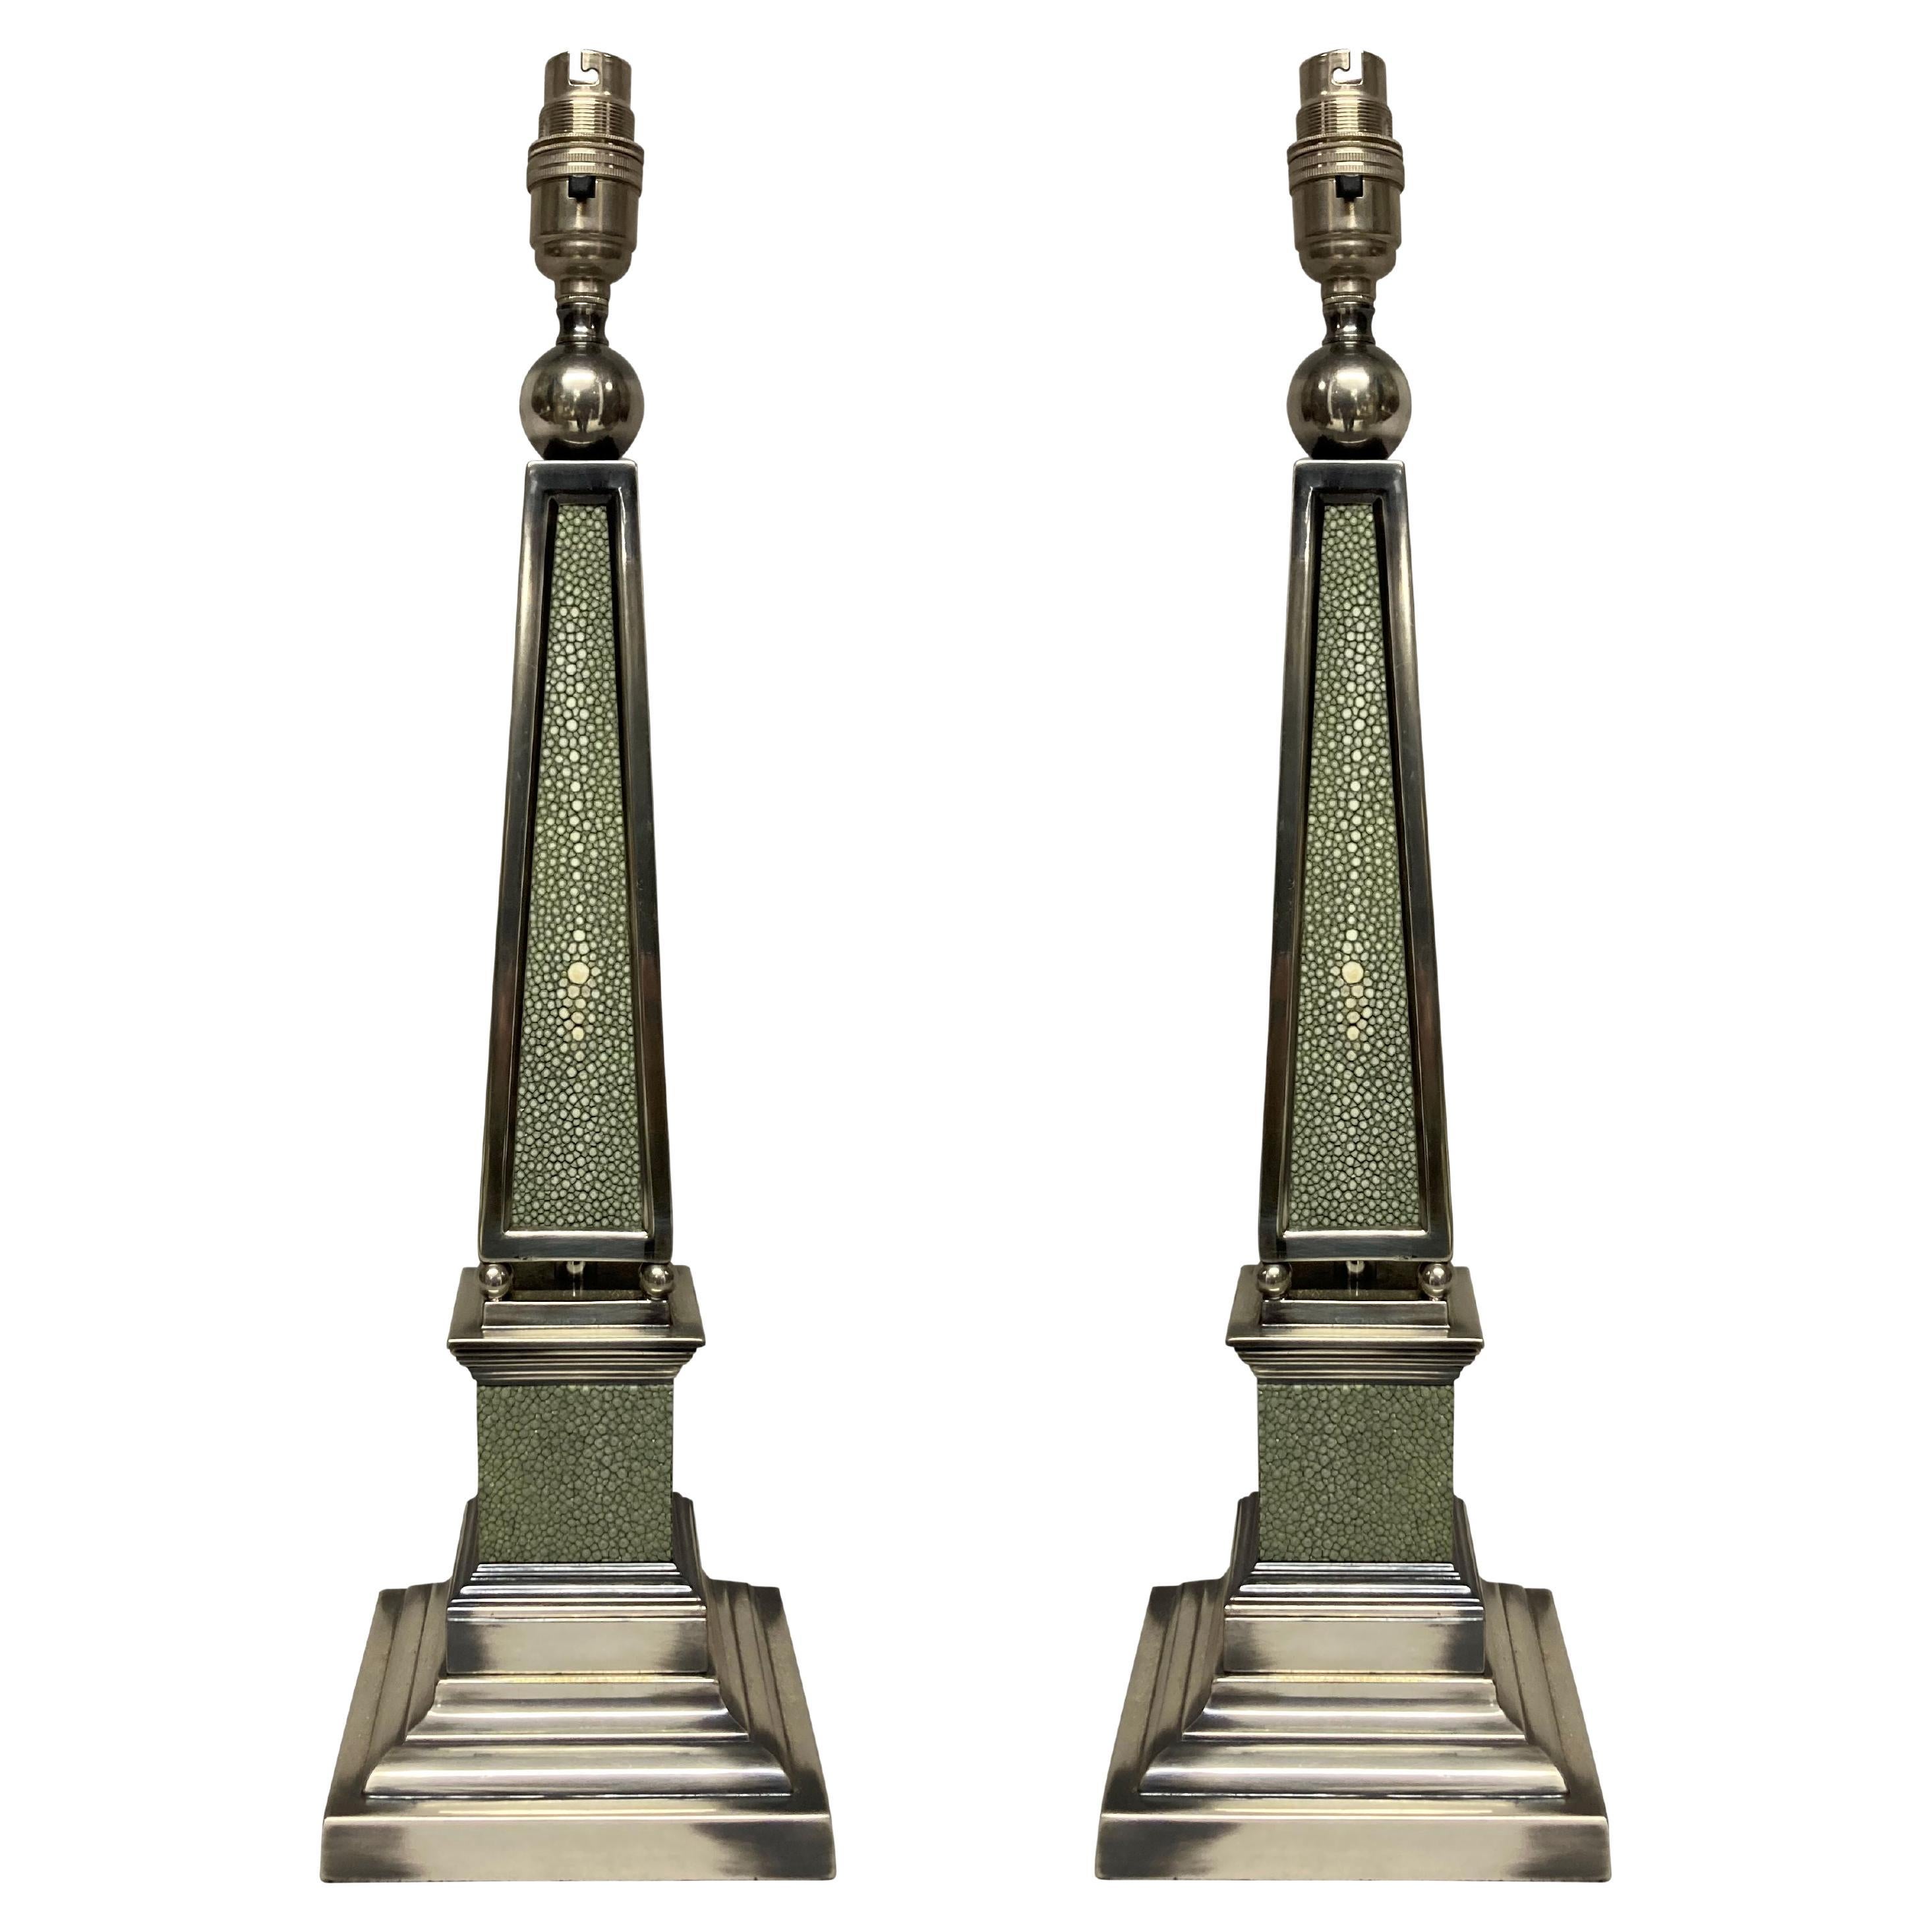 Pair of English Silver Plated Obelisk Lamps